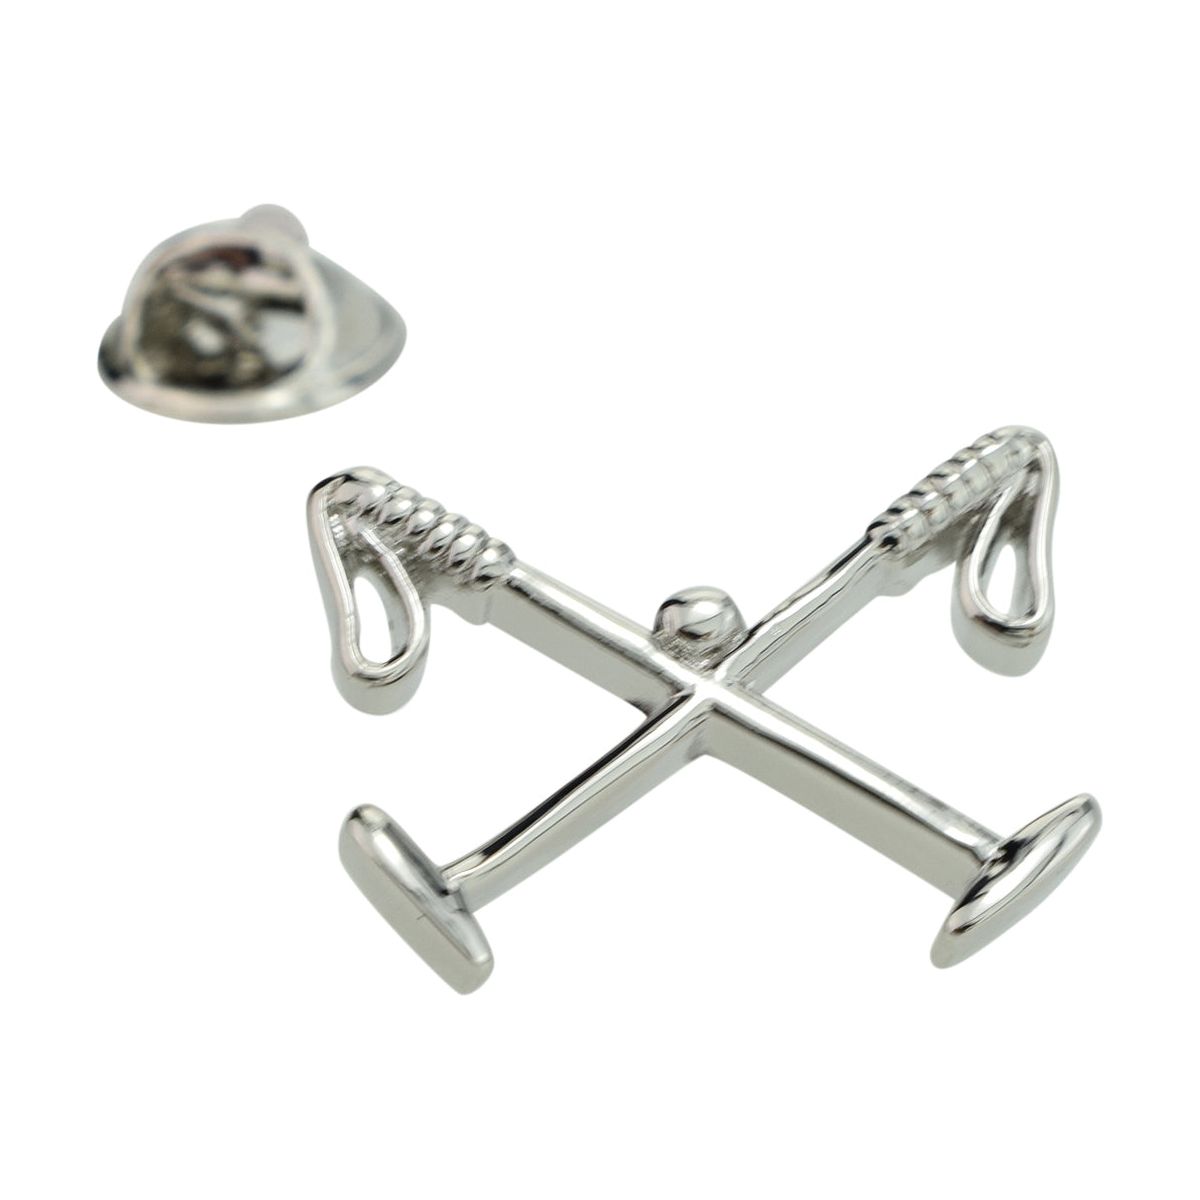 Crossed Polo Mallets Lapel Pin Badge - Ashton and Finch